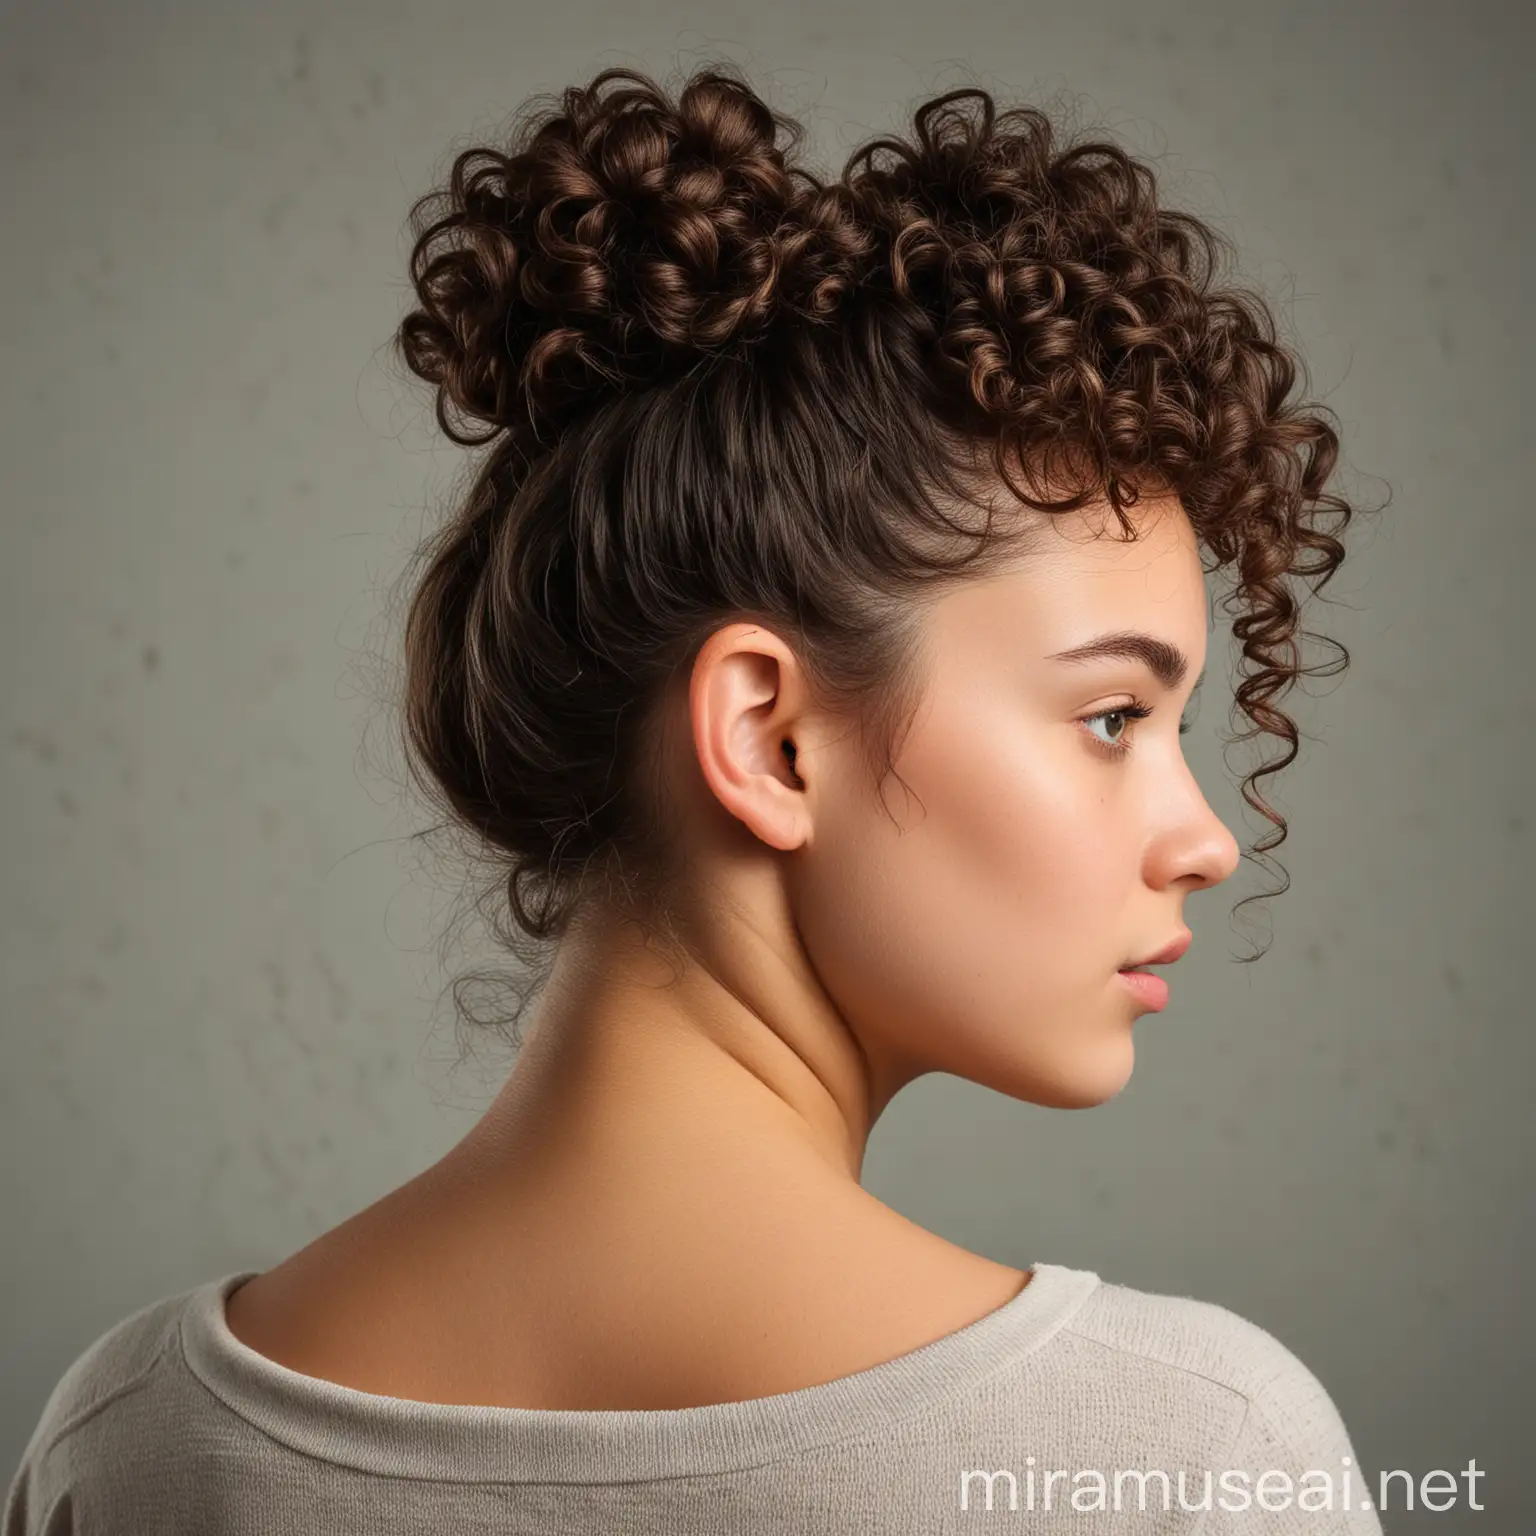 CurlyHaired Woman Turning Head in Profile